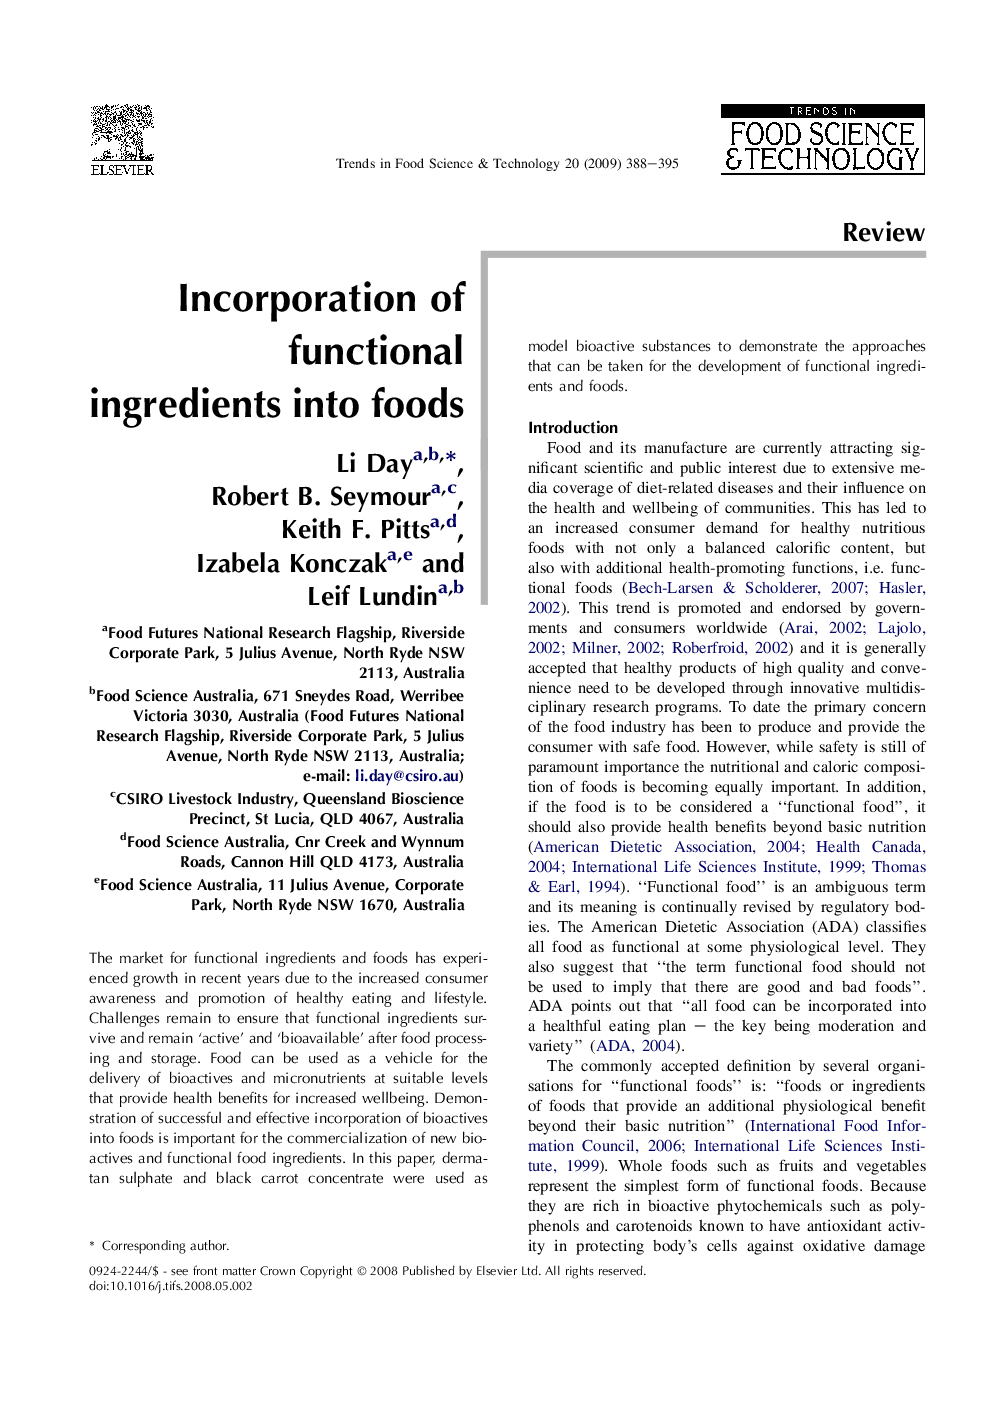 Incorporation of functional ingredients into foods